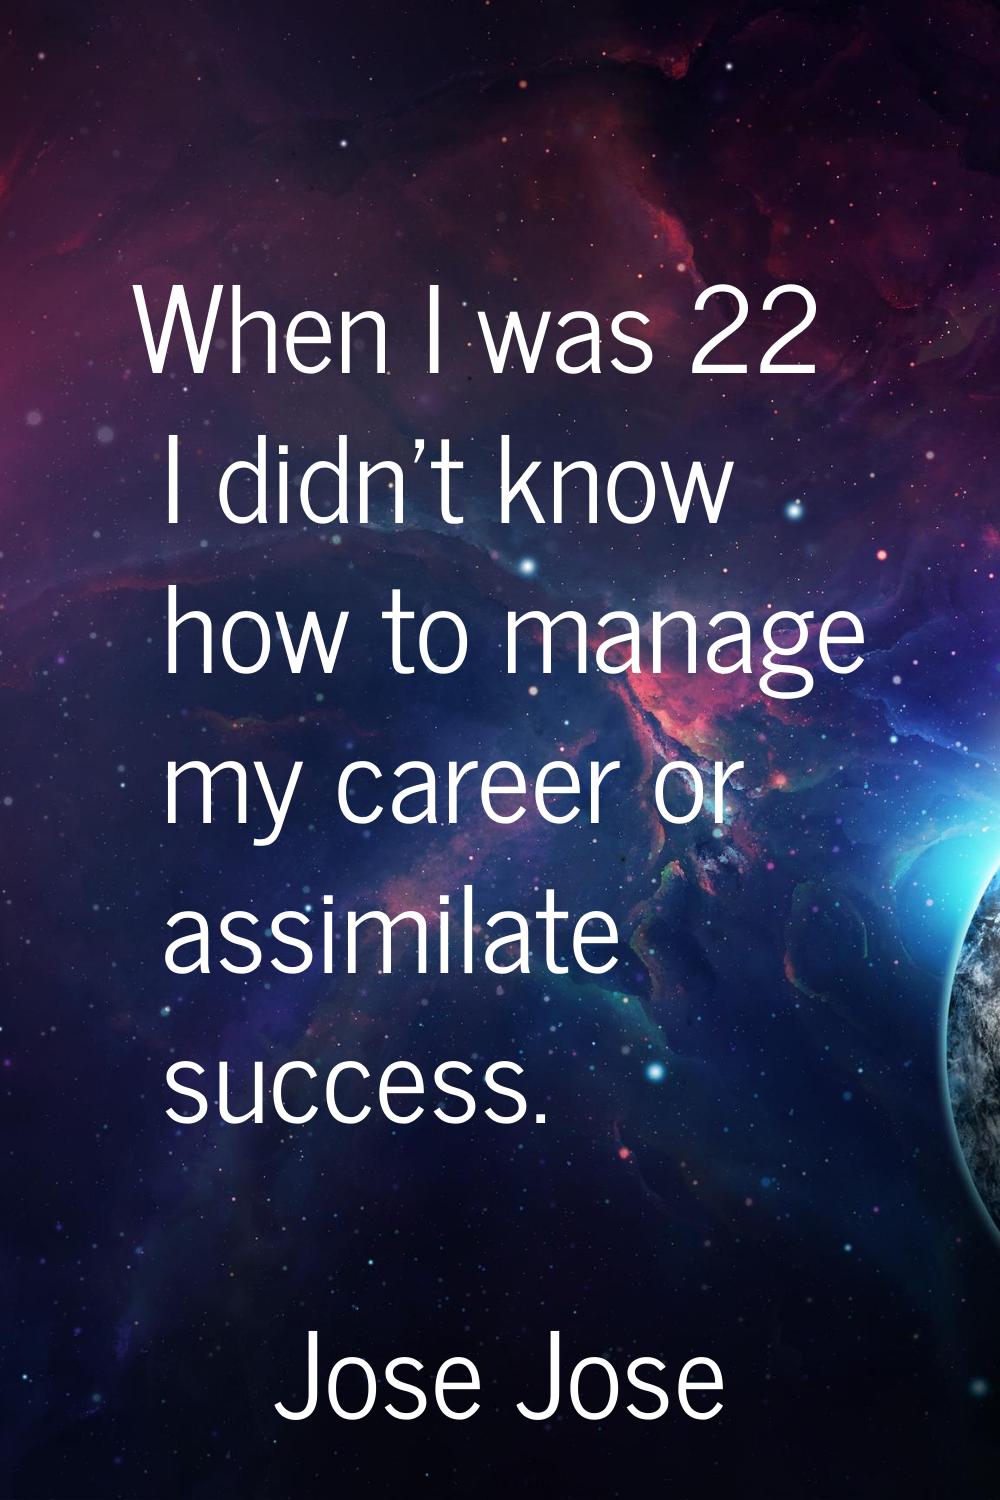 When I was 22 I didn't know how to manage my career or assimilate success.